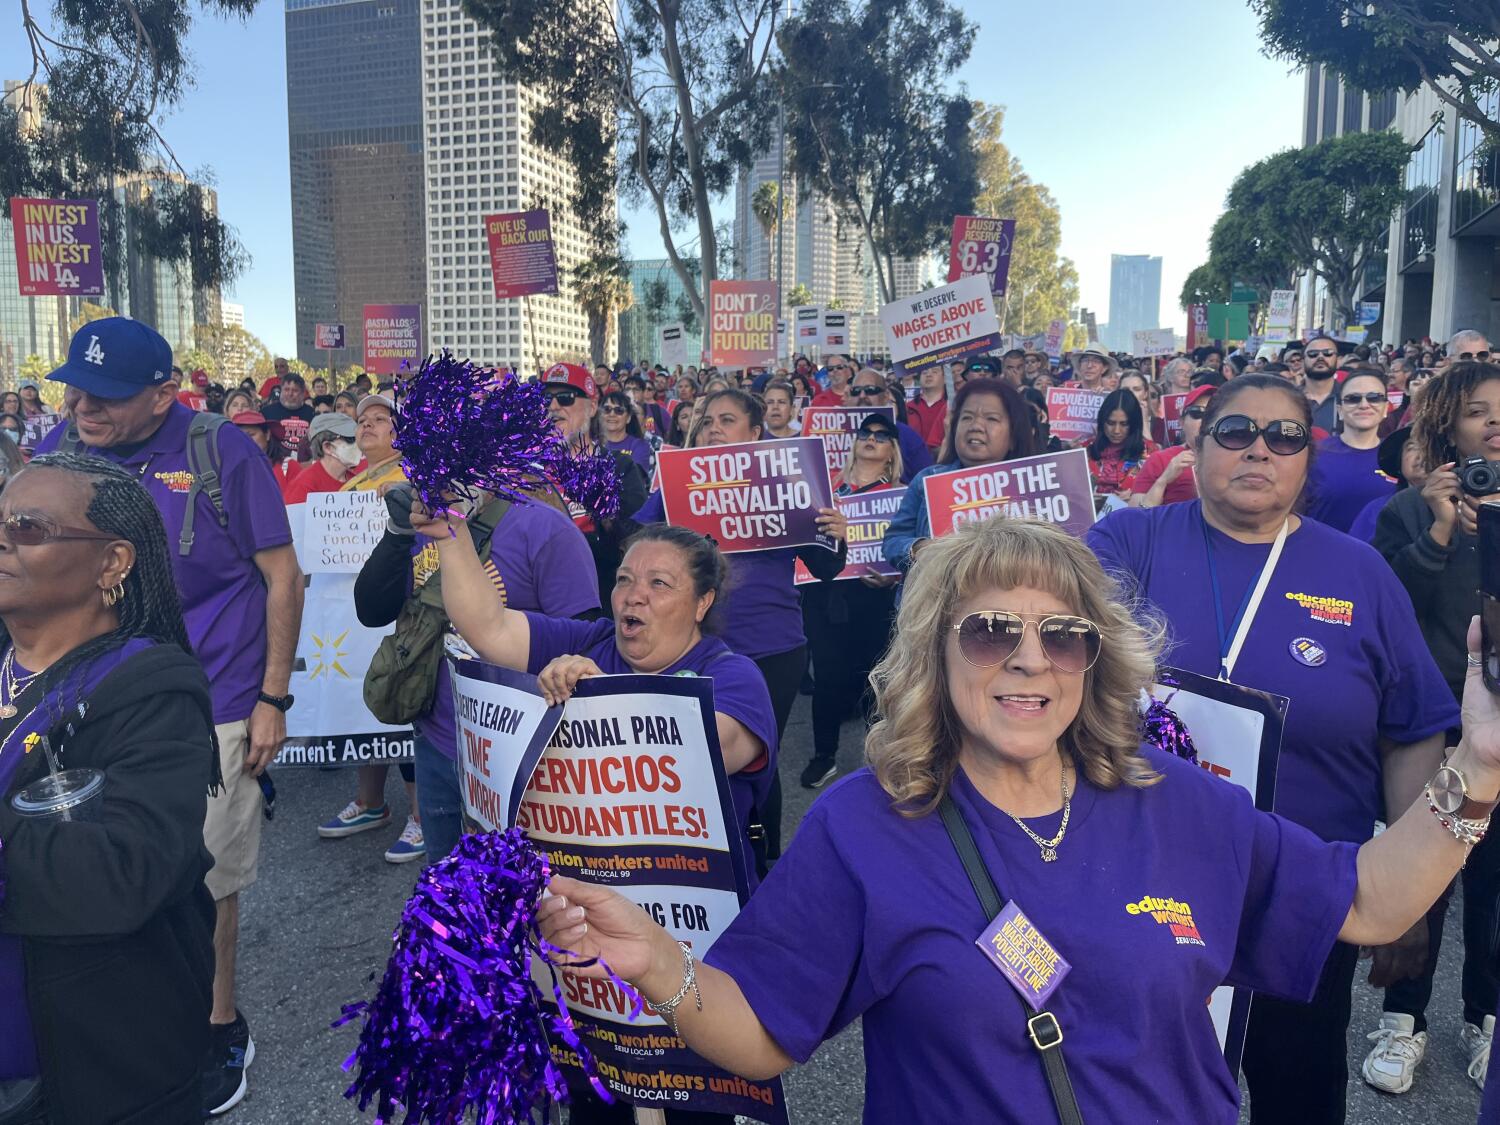 thousands-rally-over-expected-school-cuts,-a-rebuke-to-lausd’s-pledge-to-protect-workers